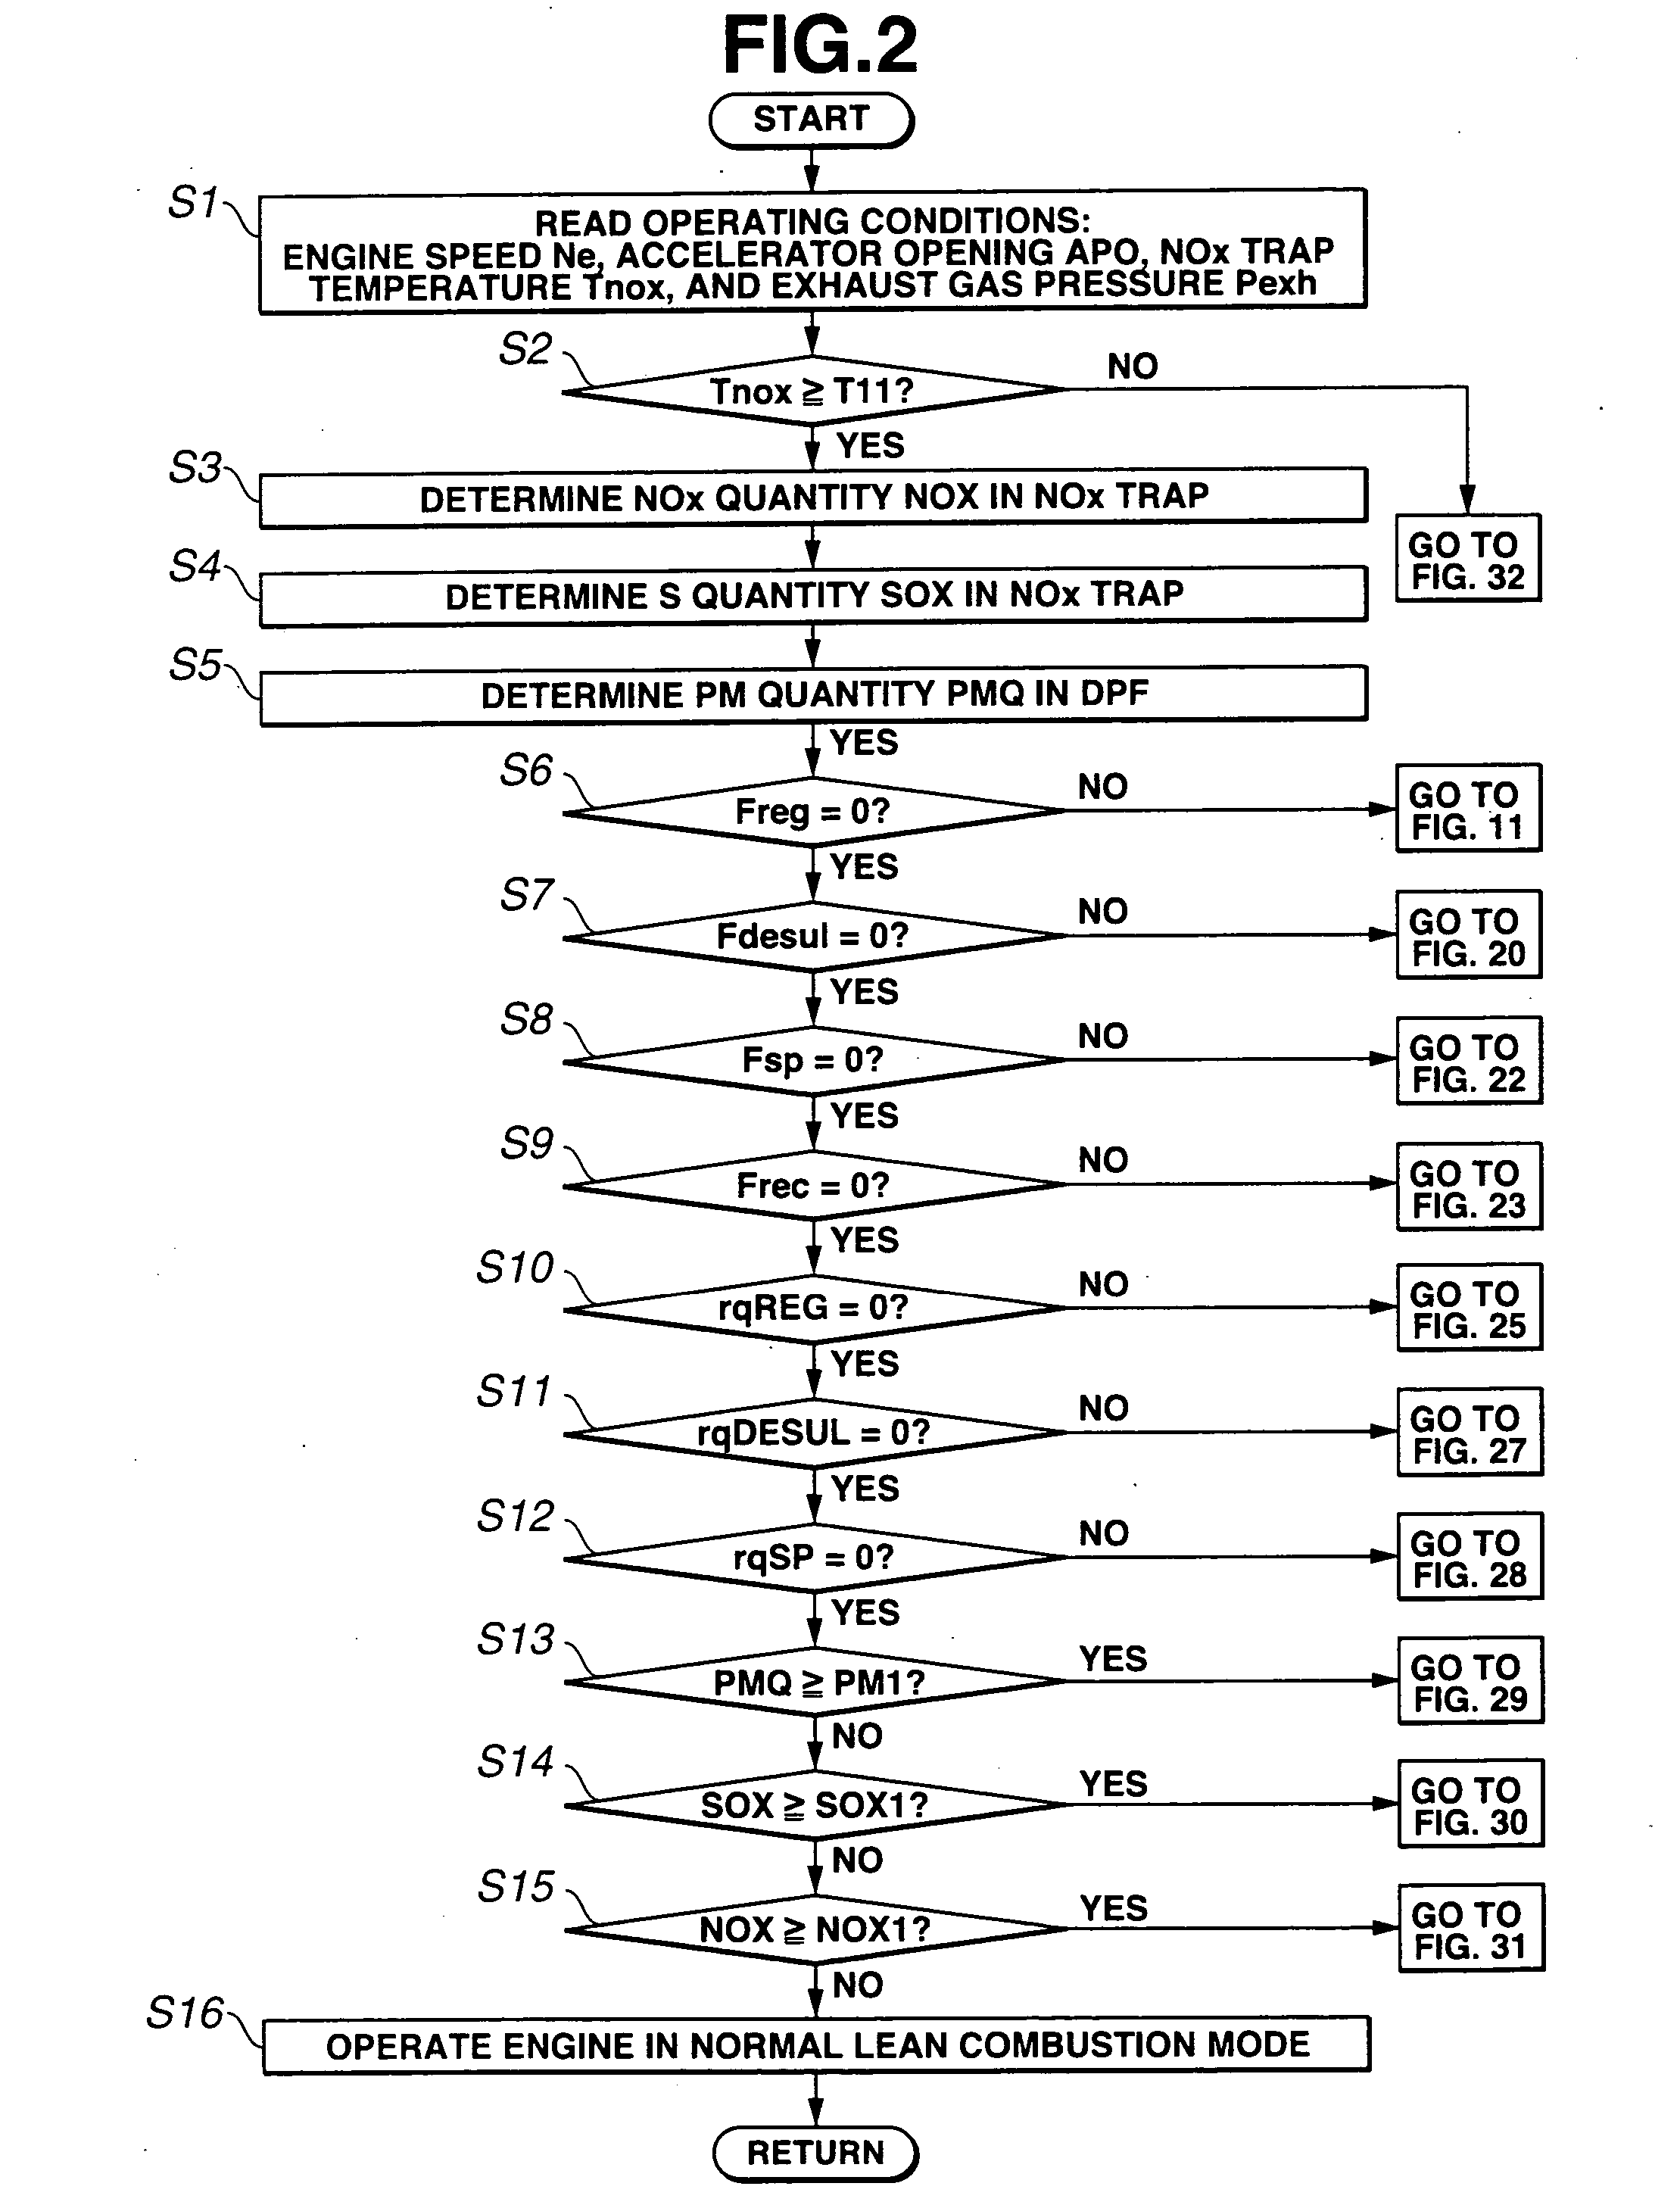 Combustion control apparatus for internal combustion engine